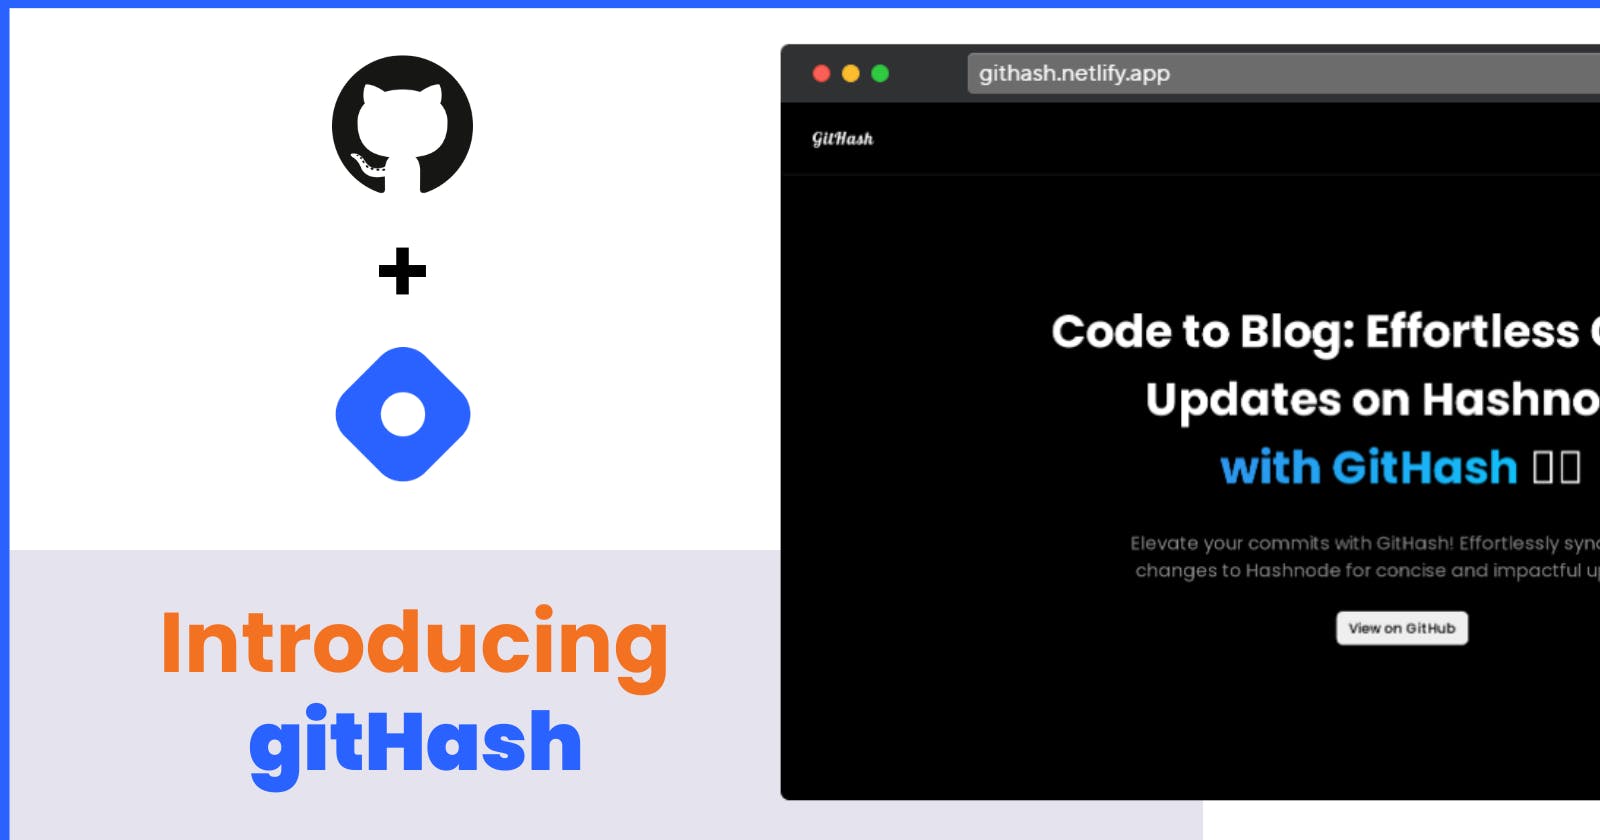 Introducing gitHash - Let's utilize the power of : 'git push'